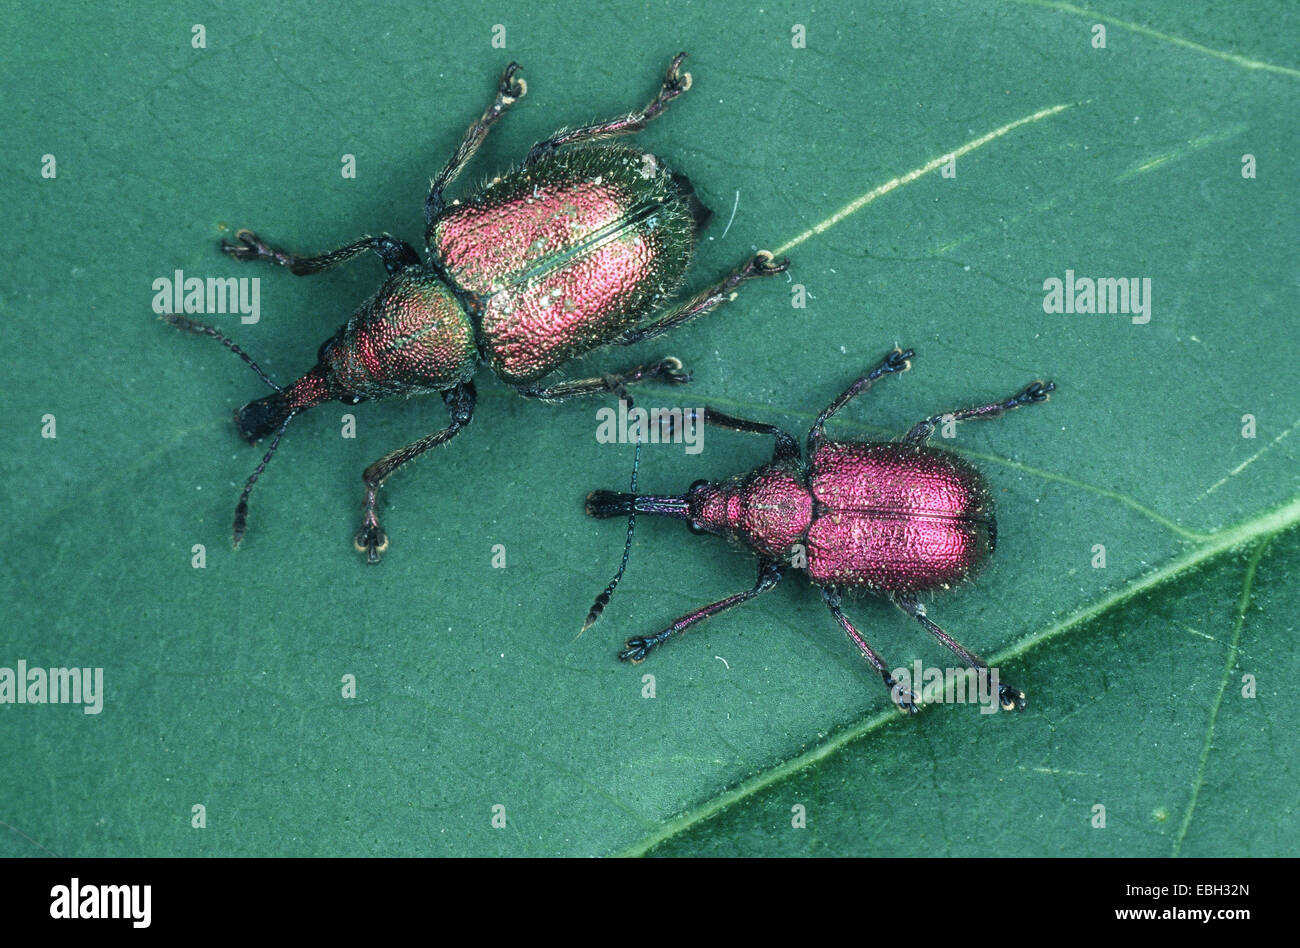 hazel leaf roller weevil (Byctiscus betulae), two individuals on a leaf. Stock Photo